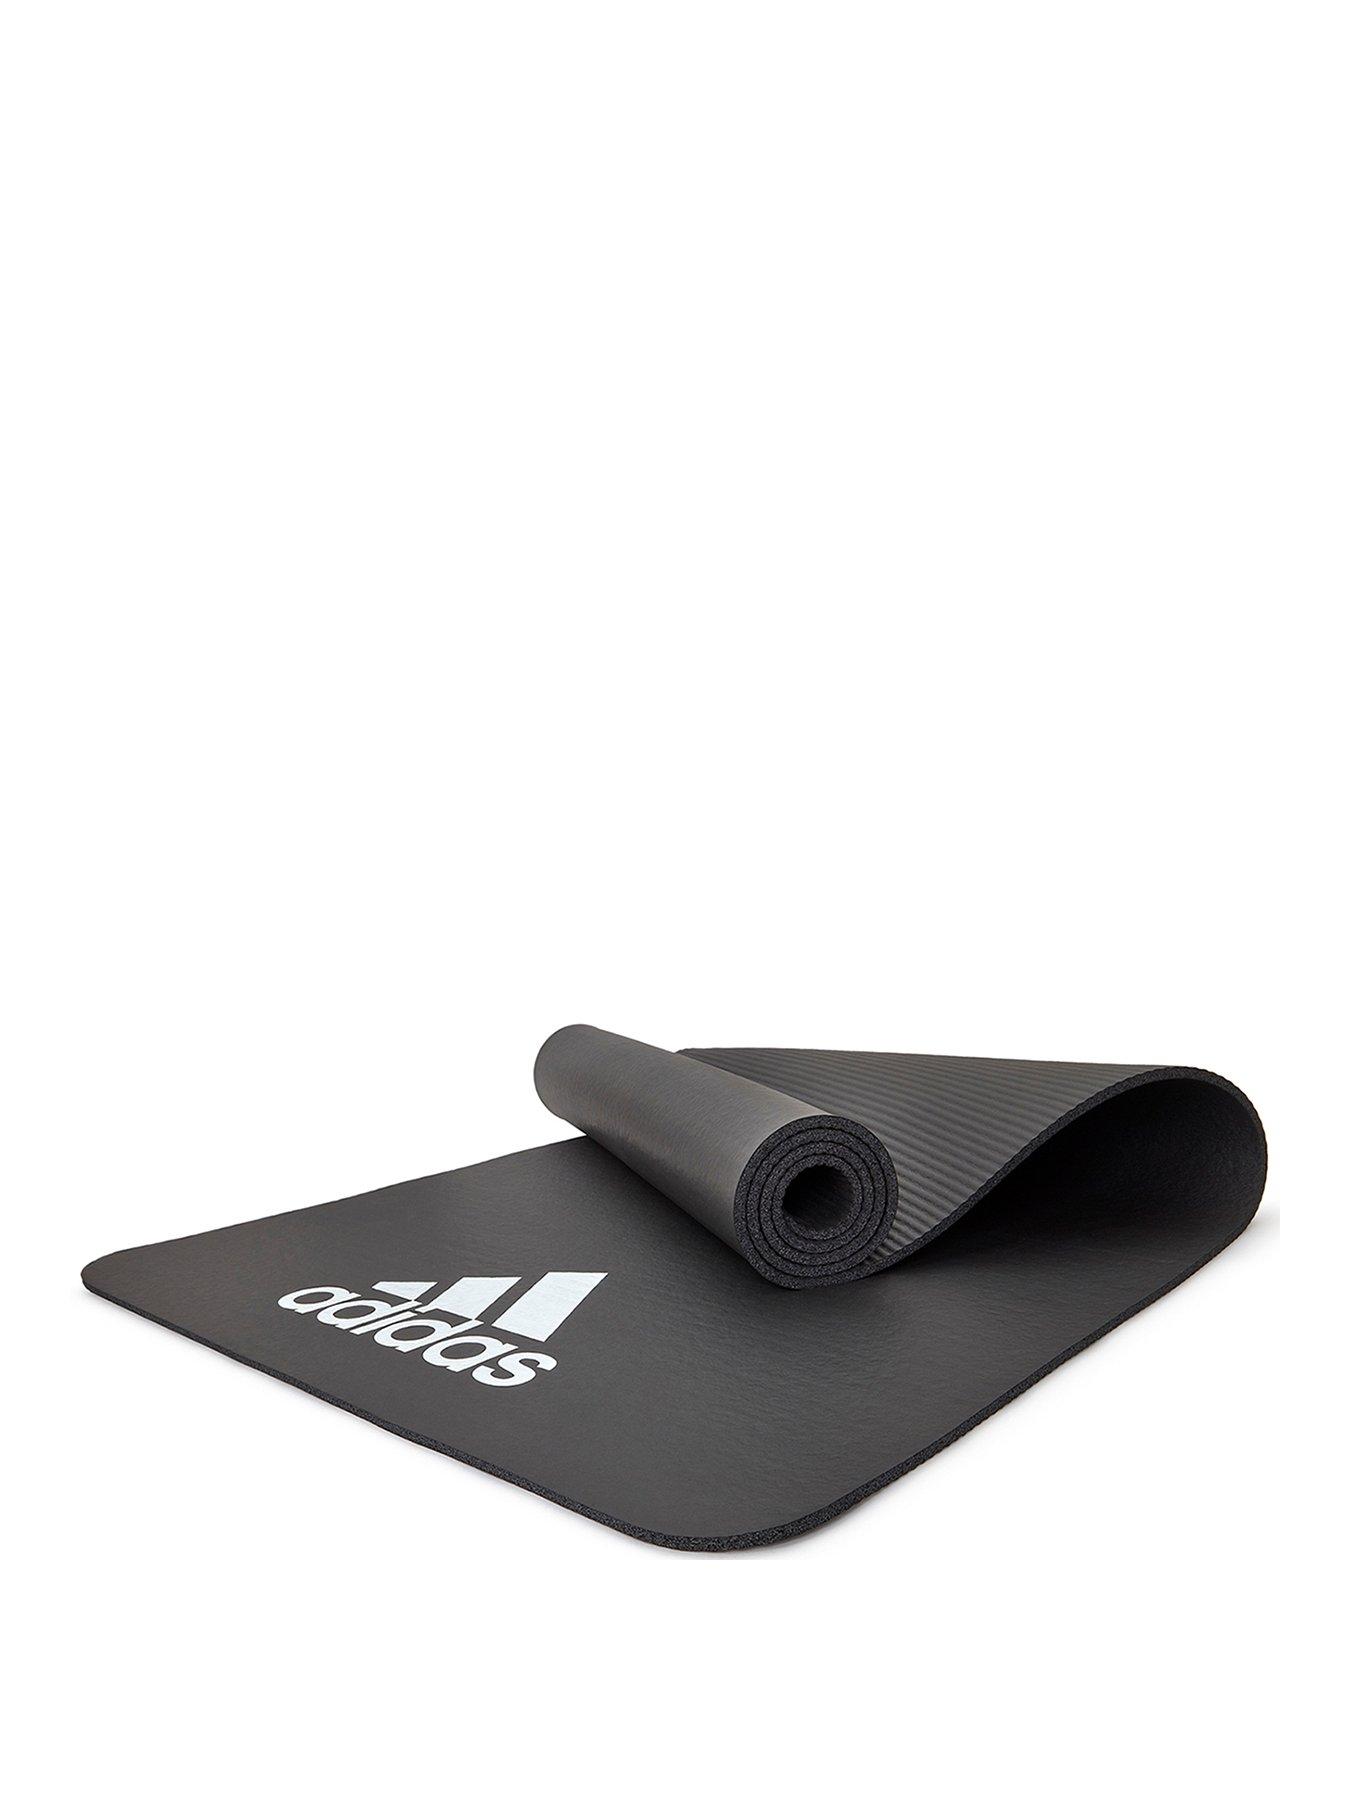 adidas fitness mat review